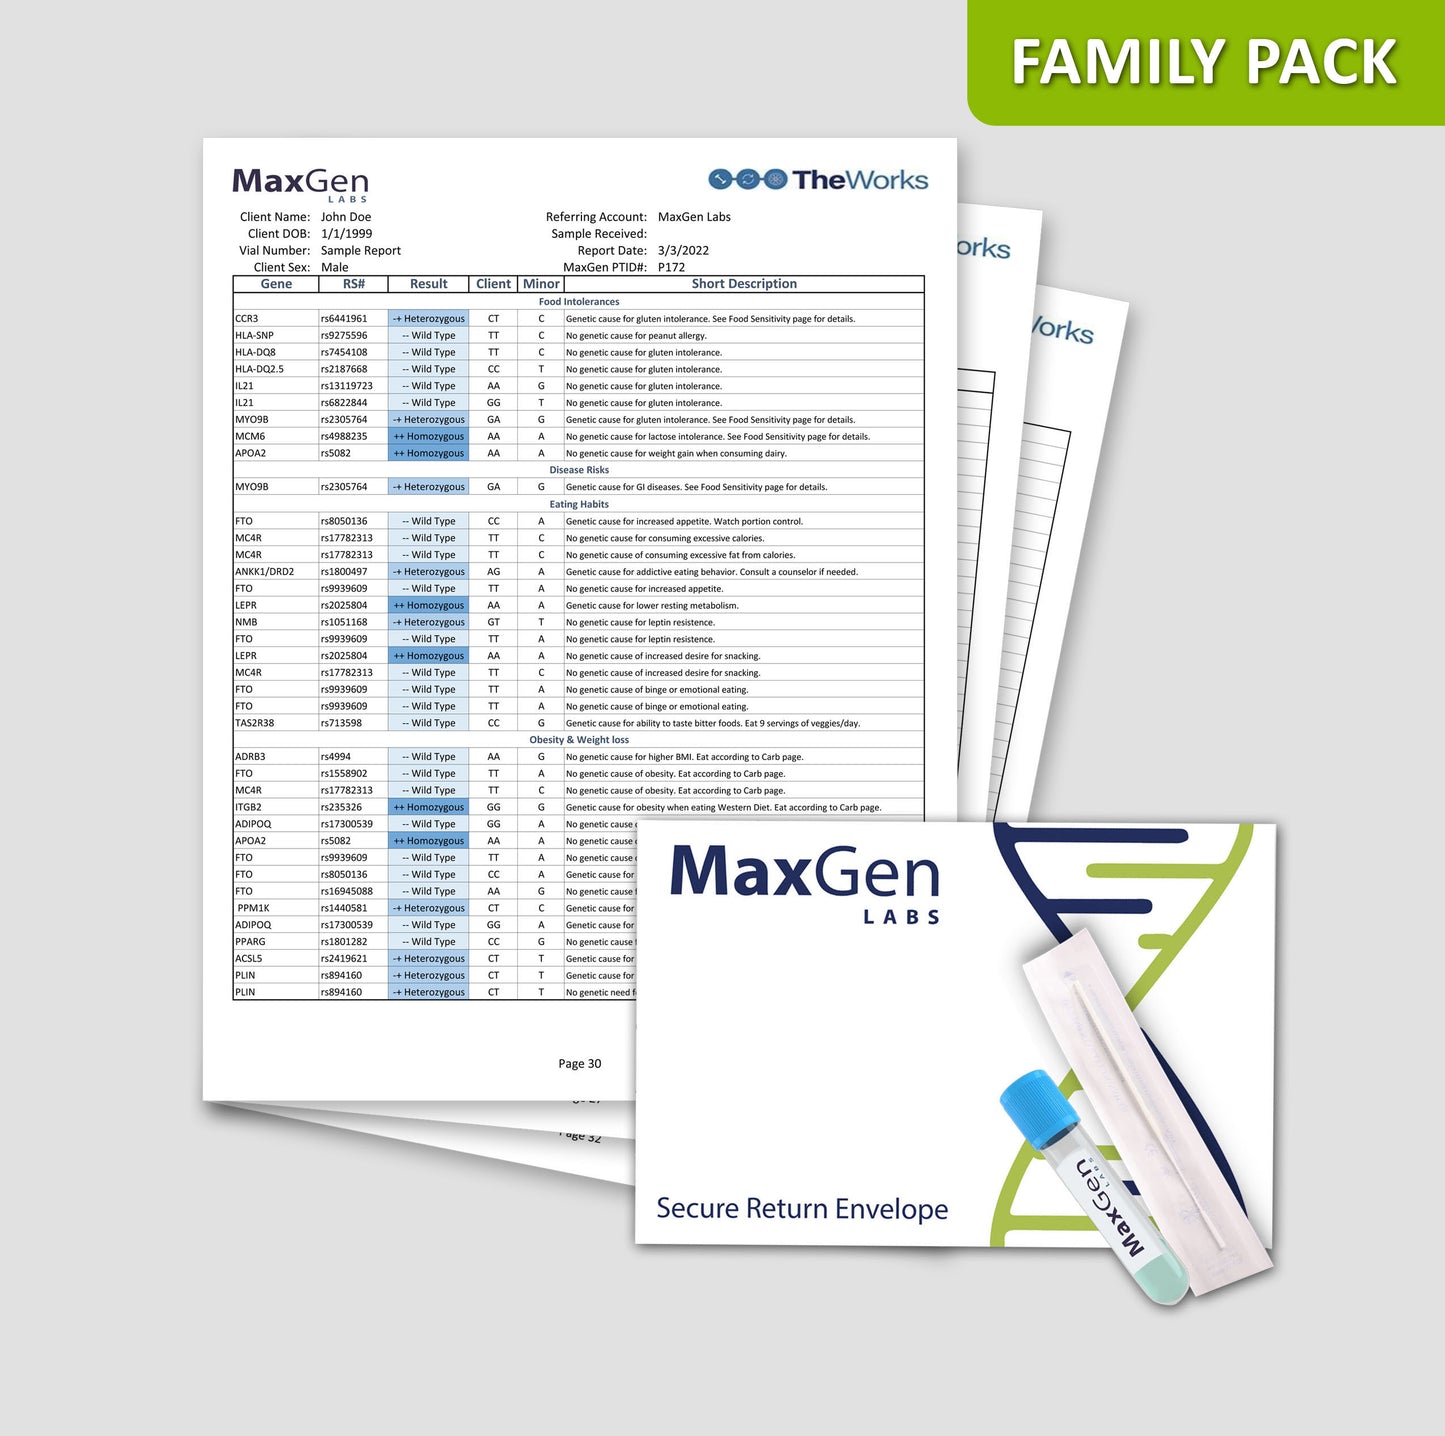 FAMILY PACK - The Works Panel (Up to 18% Off)